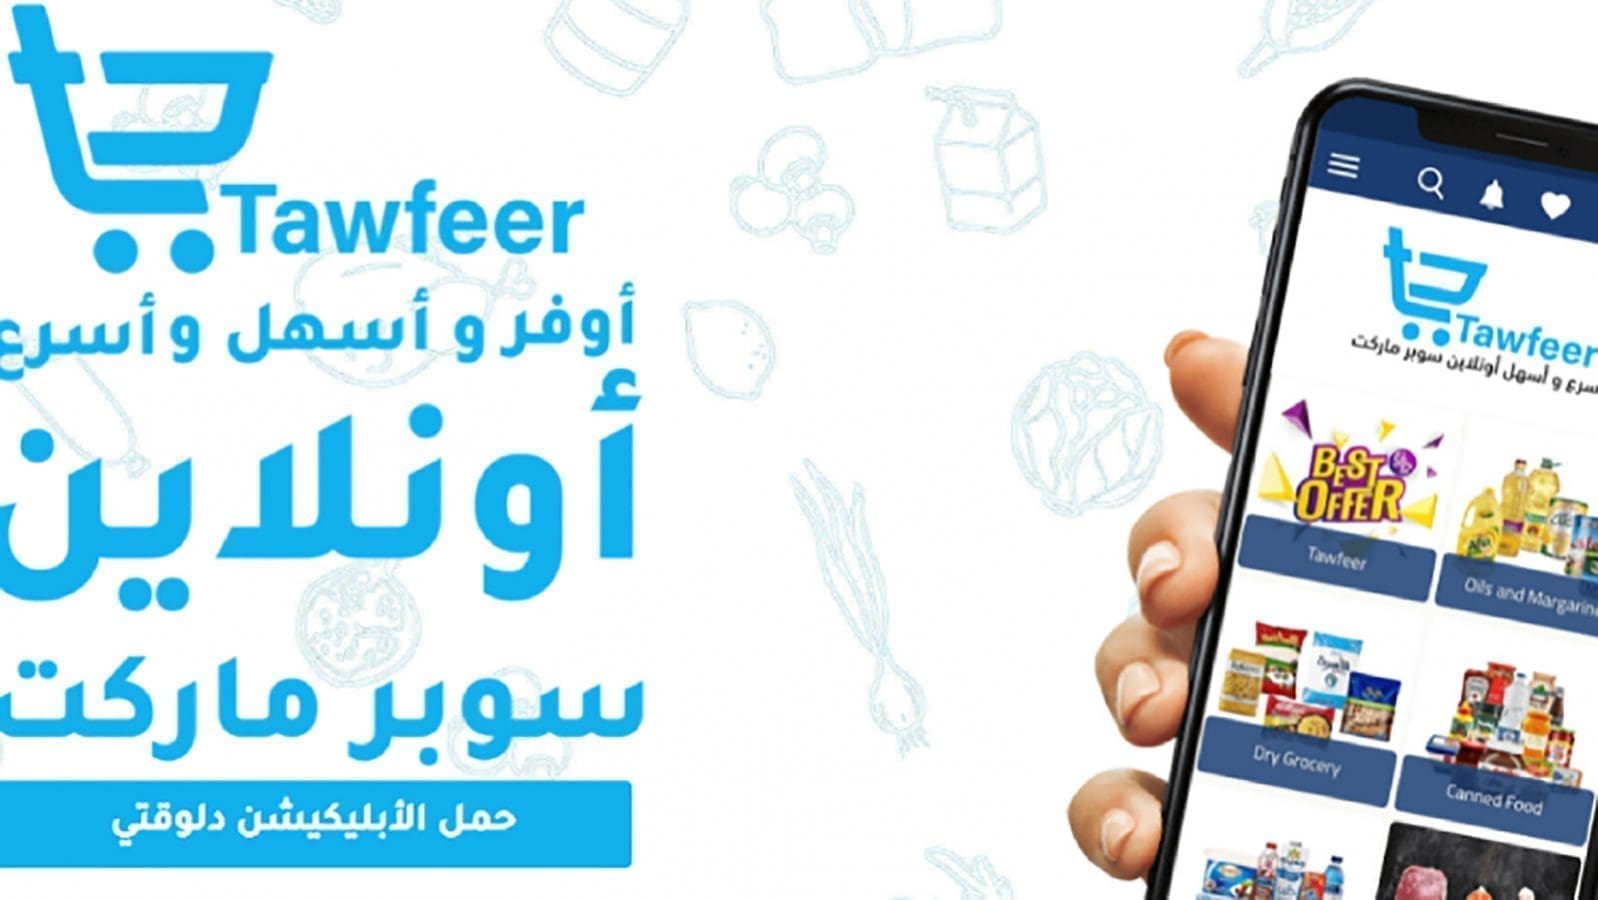 Egyptian online grocery startup Tawfeer Market raises funding to stir early growth